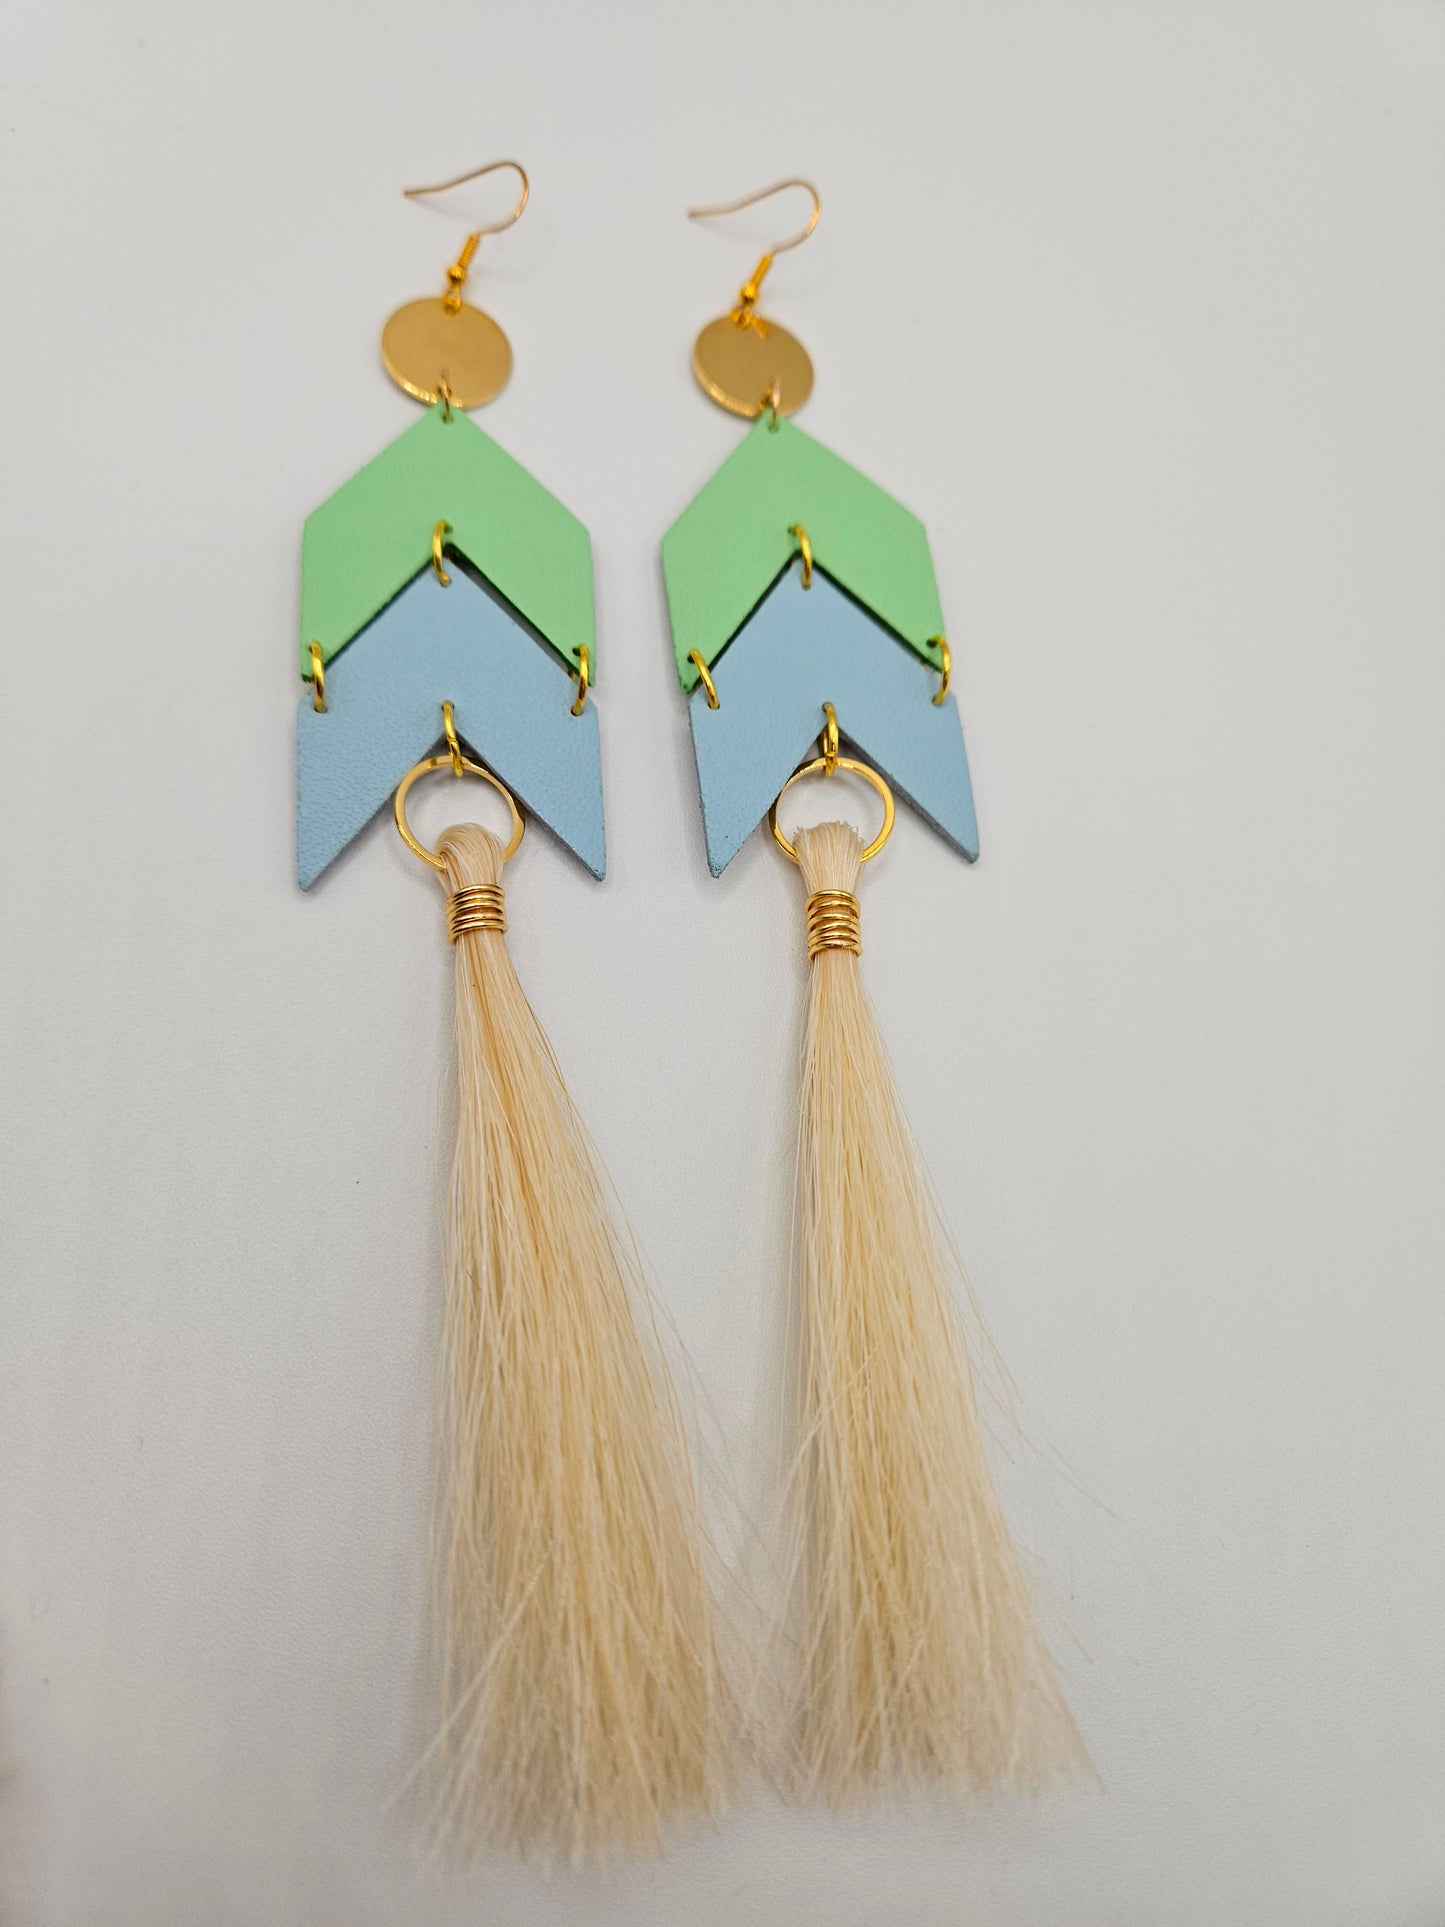 White Horsehair and Leather Chevron Earrings